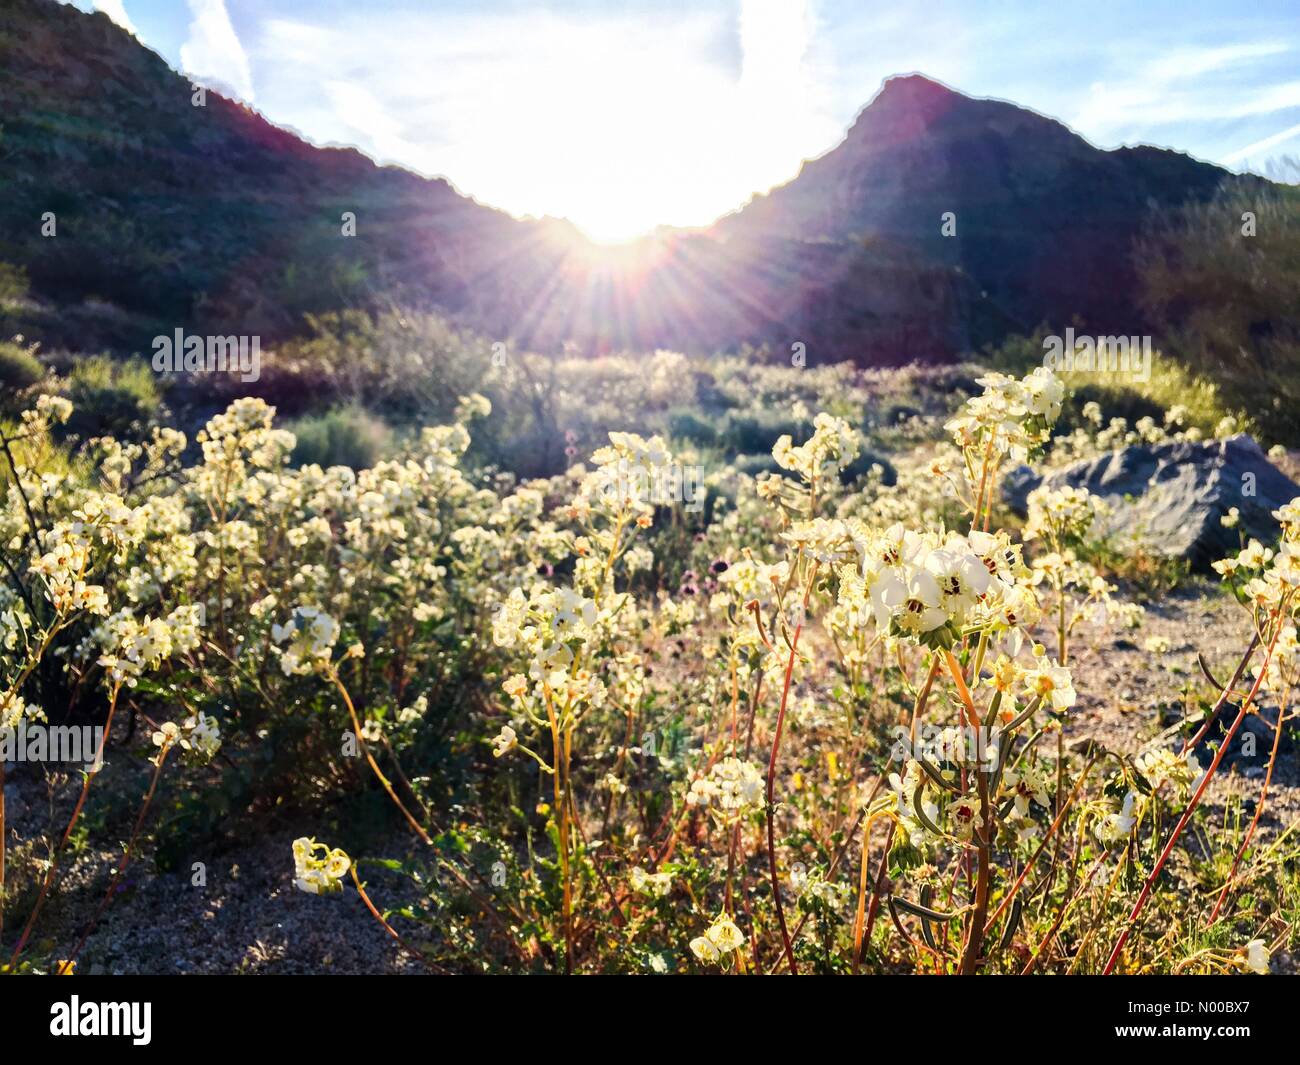 March 18, 2017 A super bloom of wildflowers at sunrise after winter rains at Joshua Tree National Park in Southern California, USA Credit: Lisa Werner/Stockimo/Alamy Live News Stock Photo